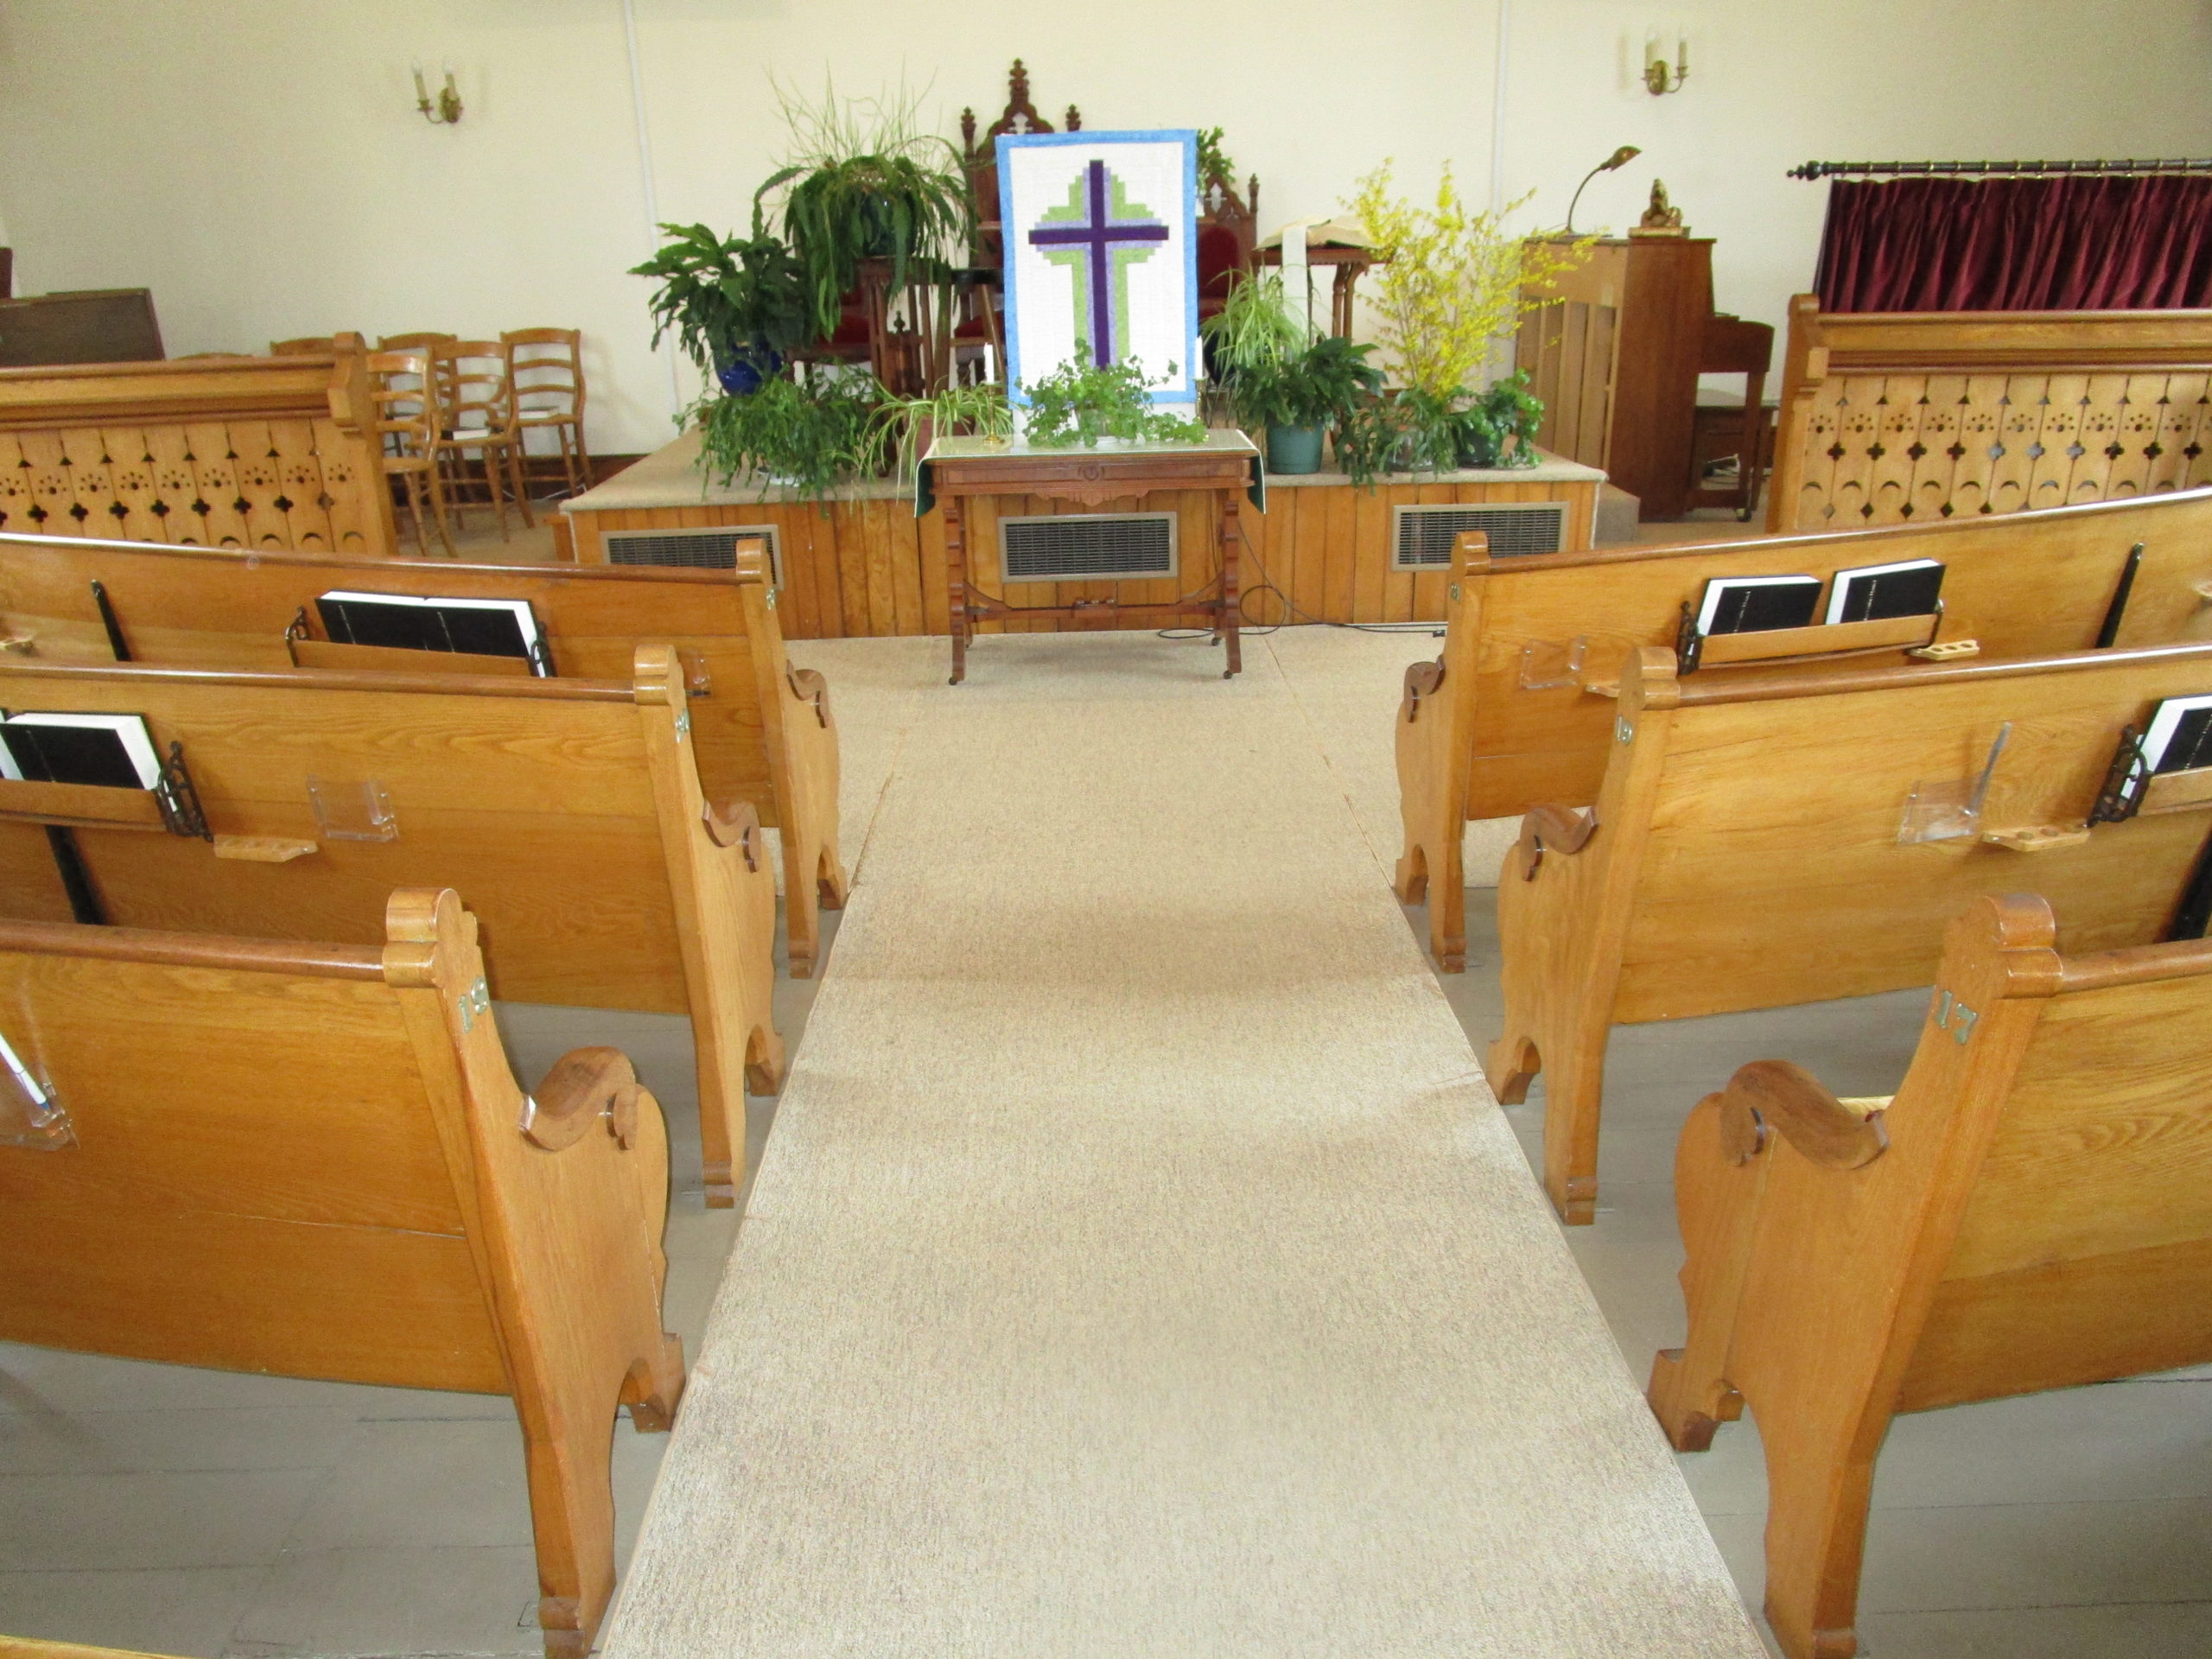 Pews of the church